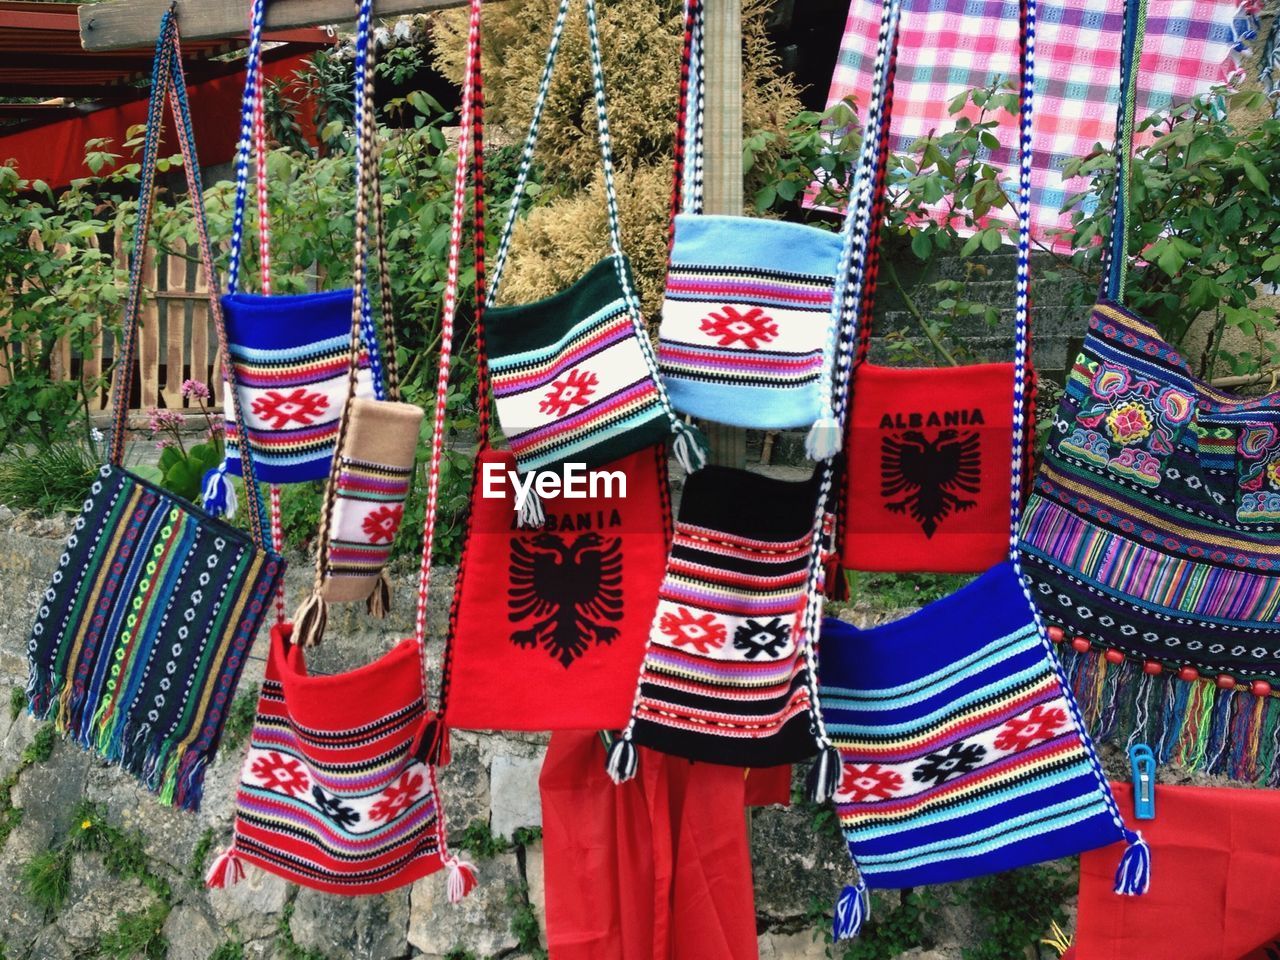 Woolen purses hanging from market stall